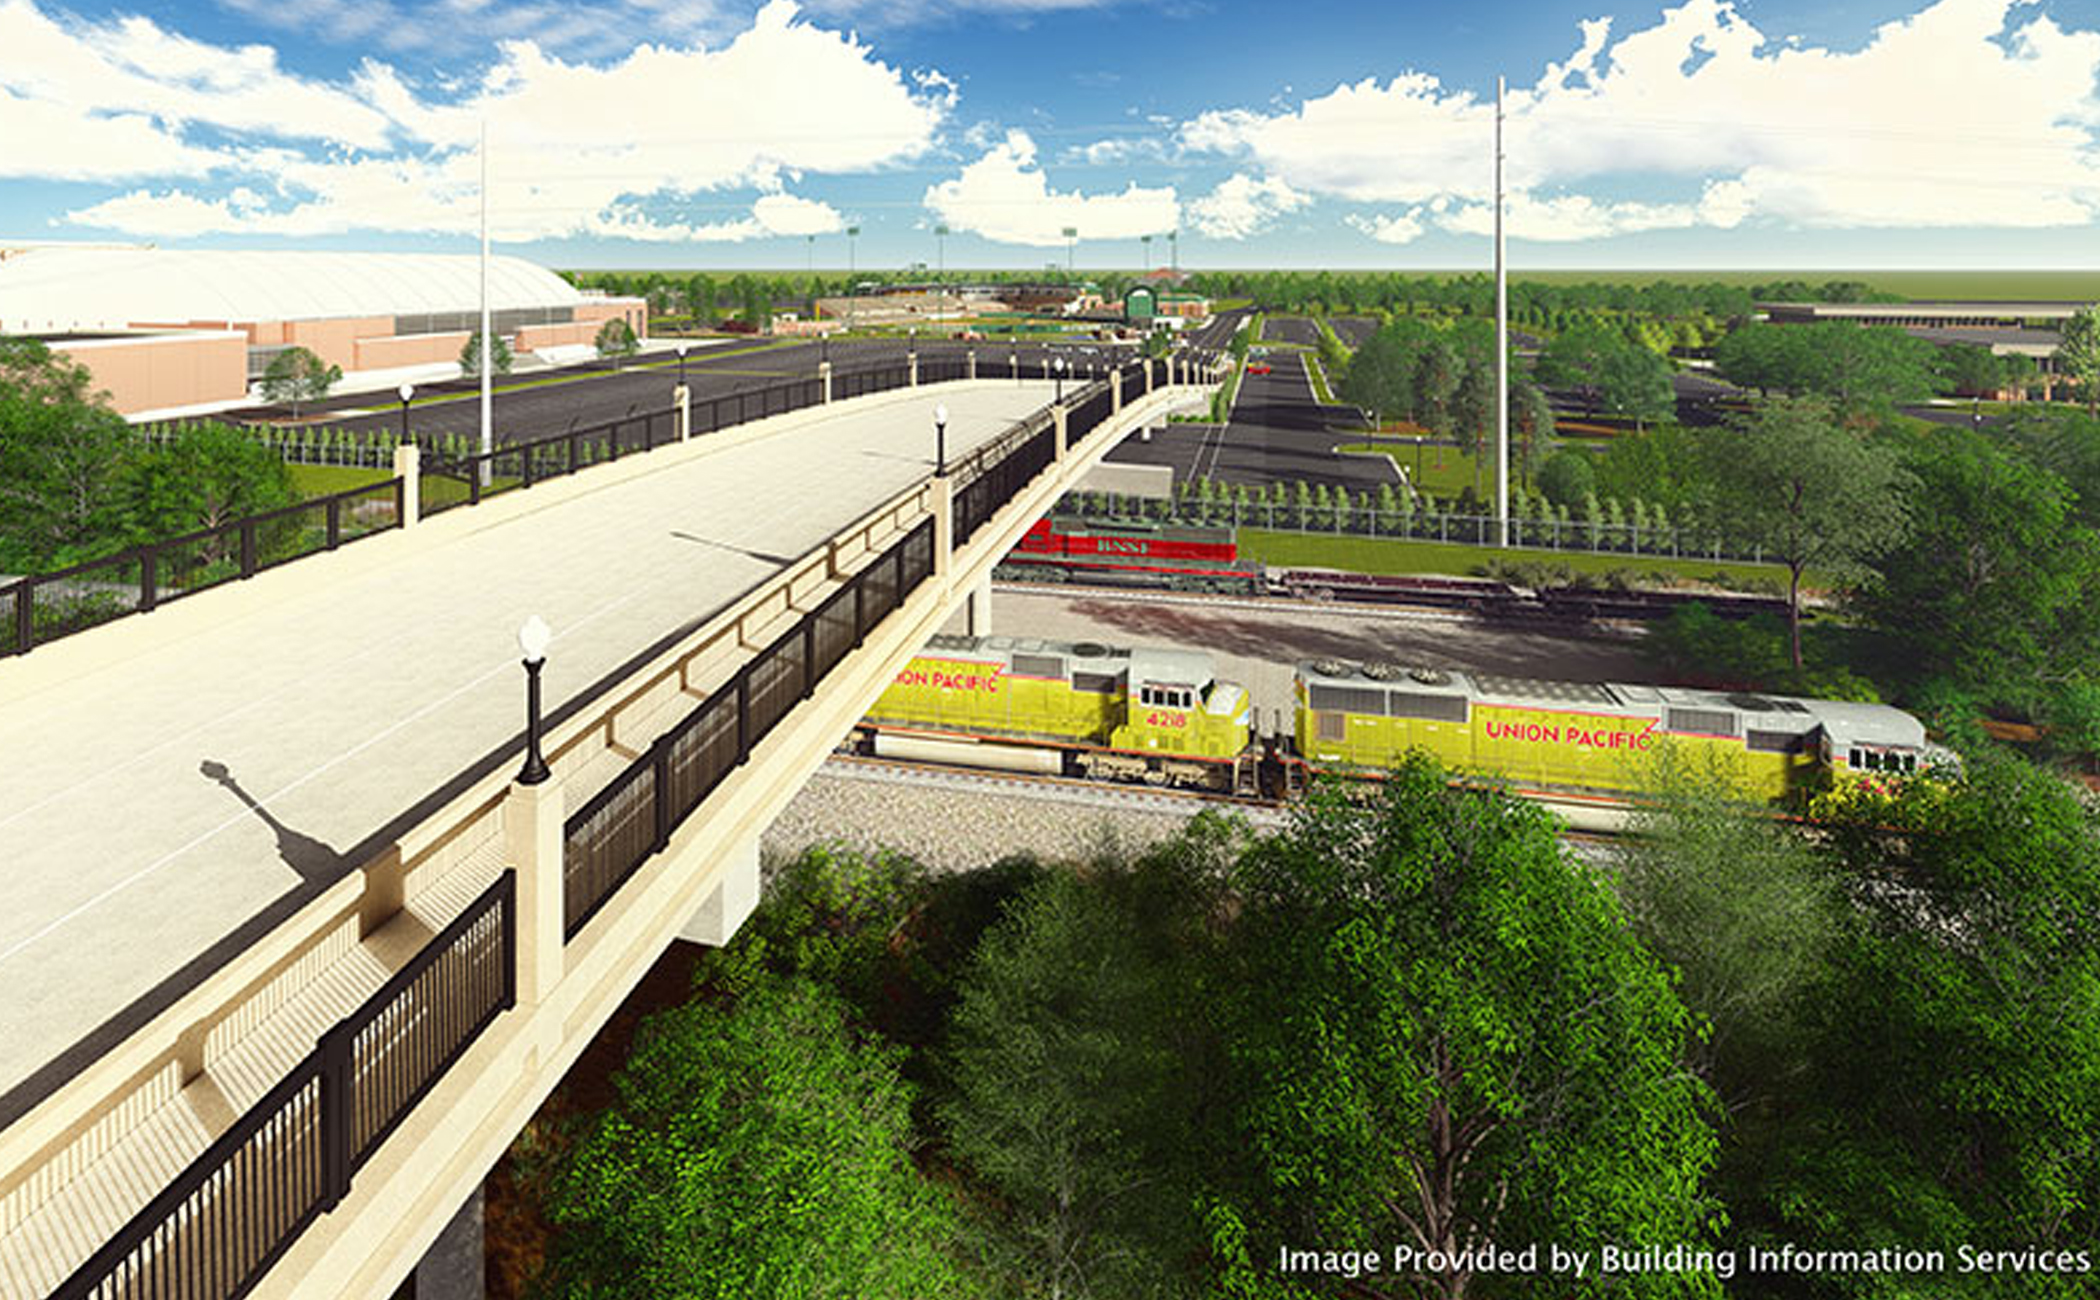 A rendering of the Second Avenue Overpass